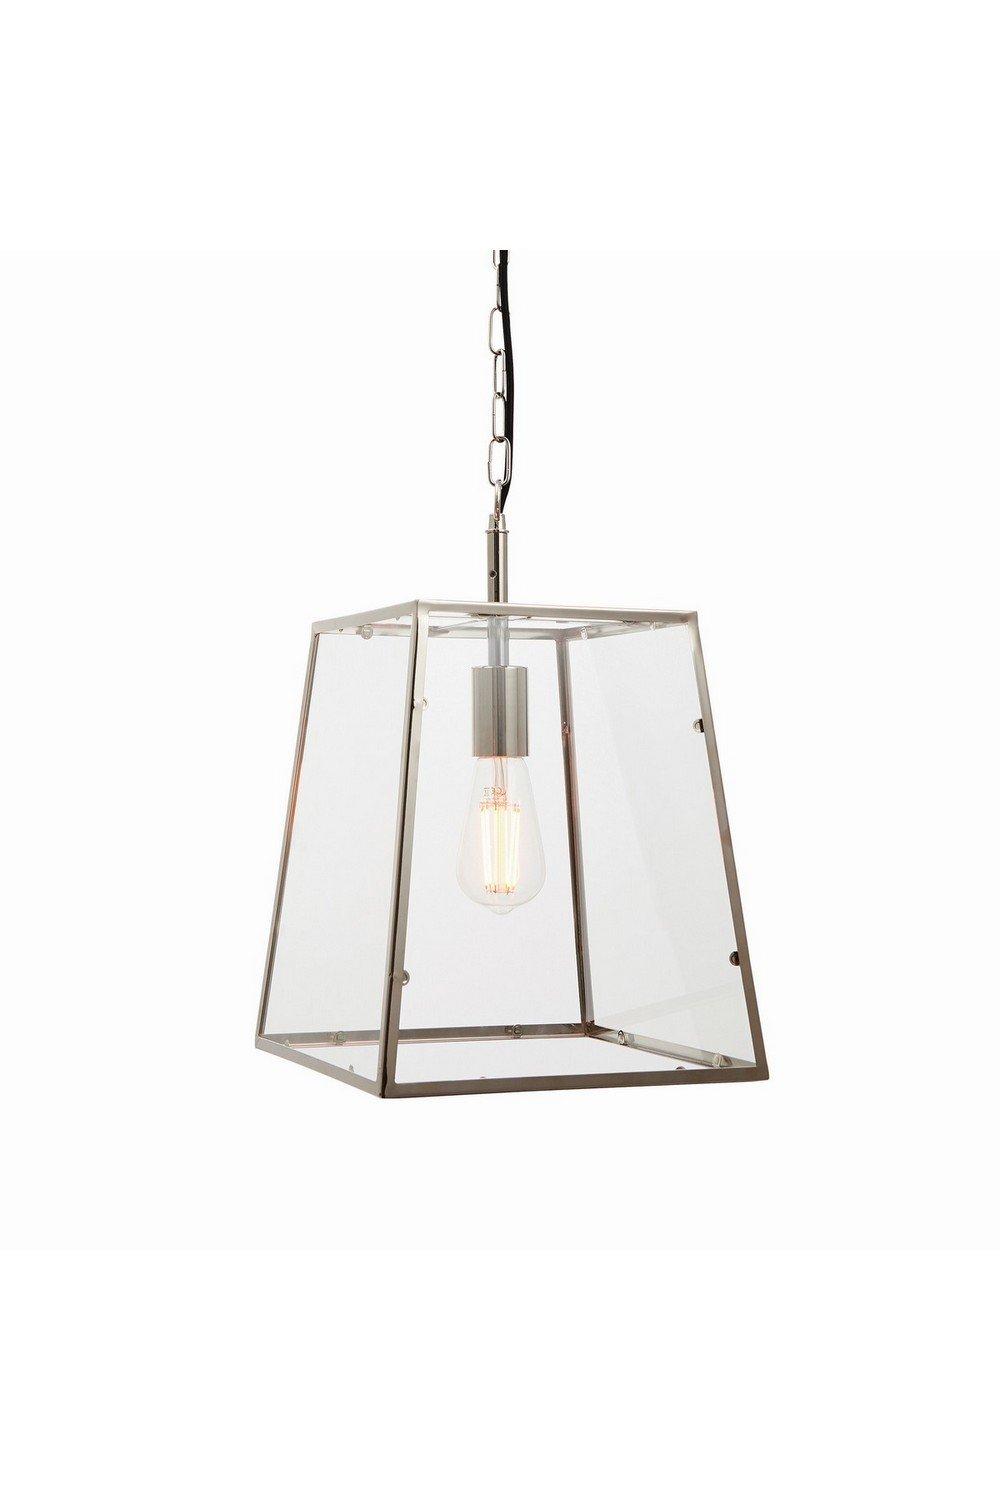 Hurst Pendant Bright Nickel Plate & Clear Glass 1 Light Dimmable IP20 E27